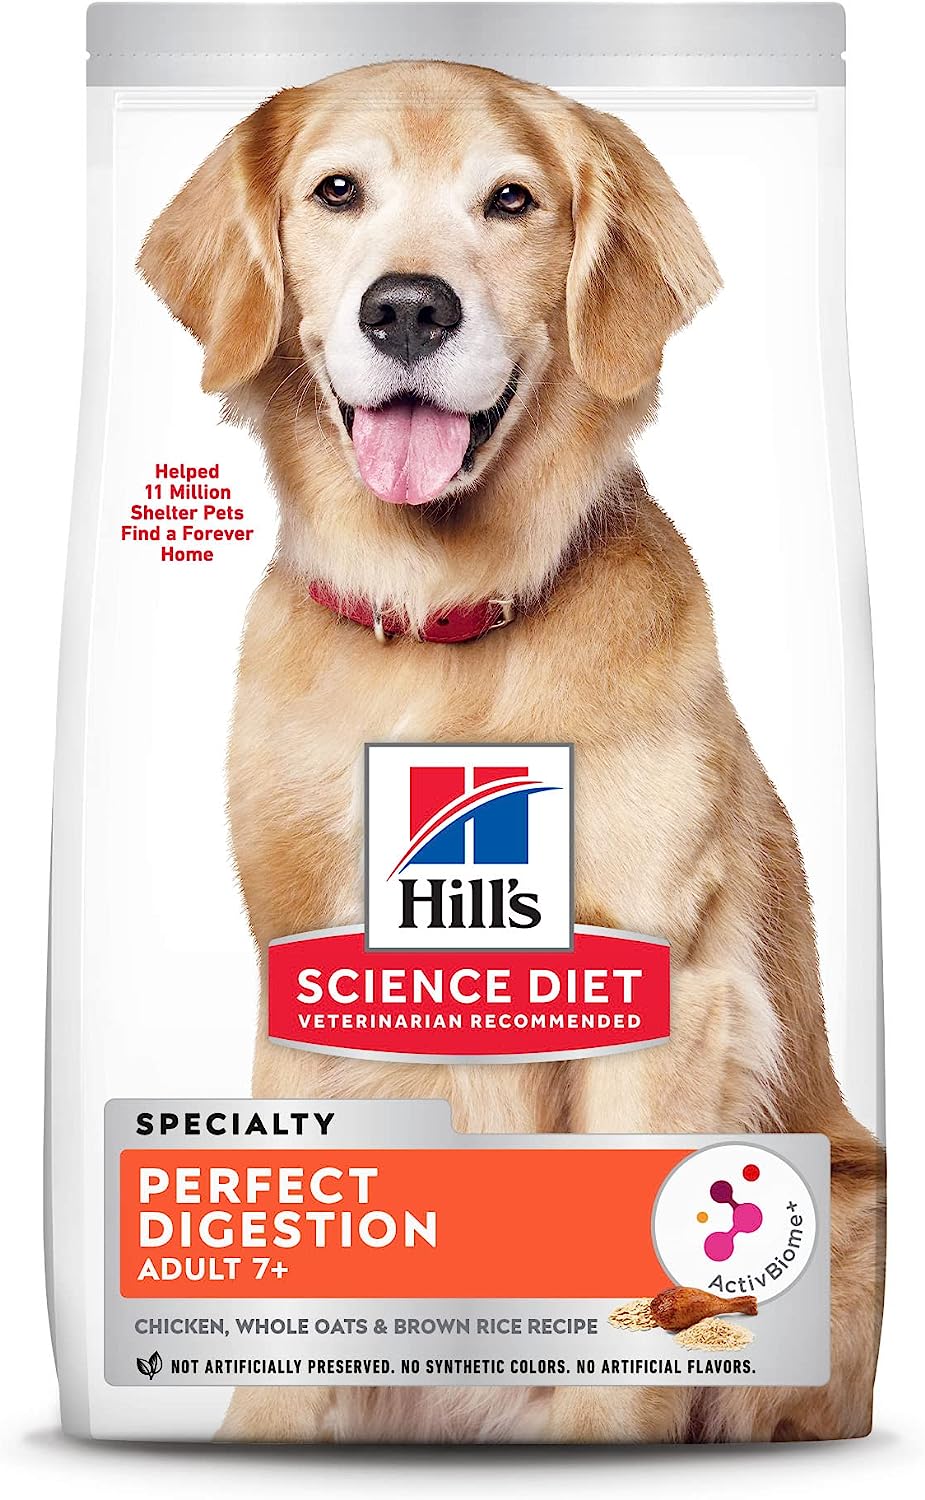 Hill’s Science Diet Adult 7+ Perfect Digestion Chicken, Whole Oats & Brown Rice Recipe Dry Dog Food – Gallery Image 1